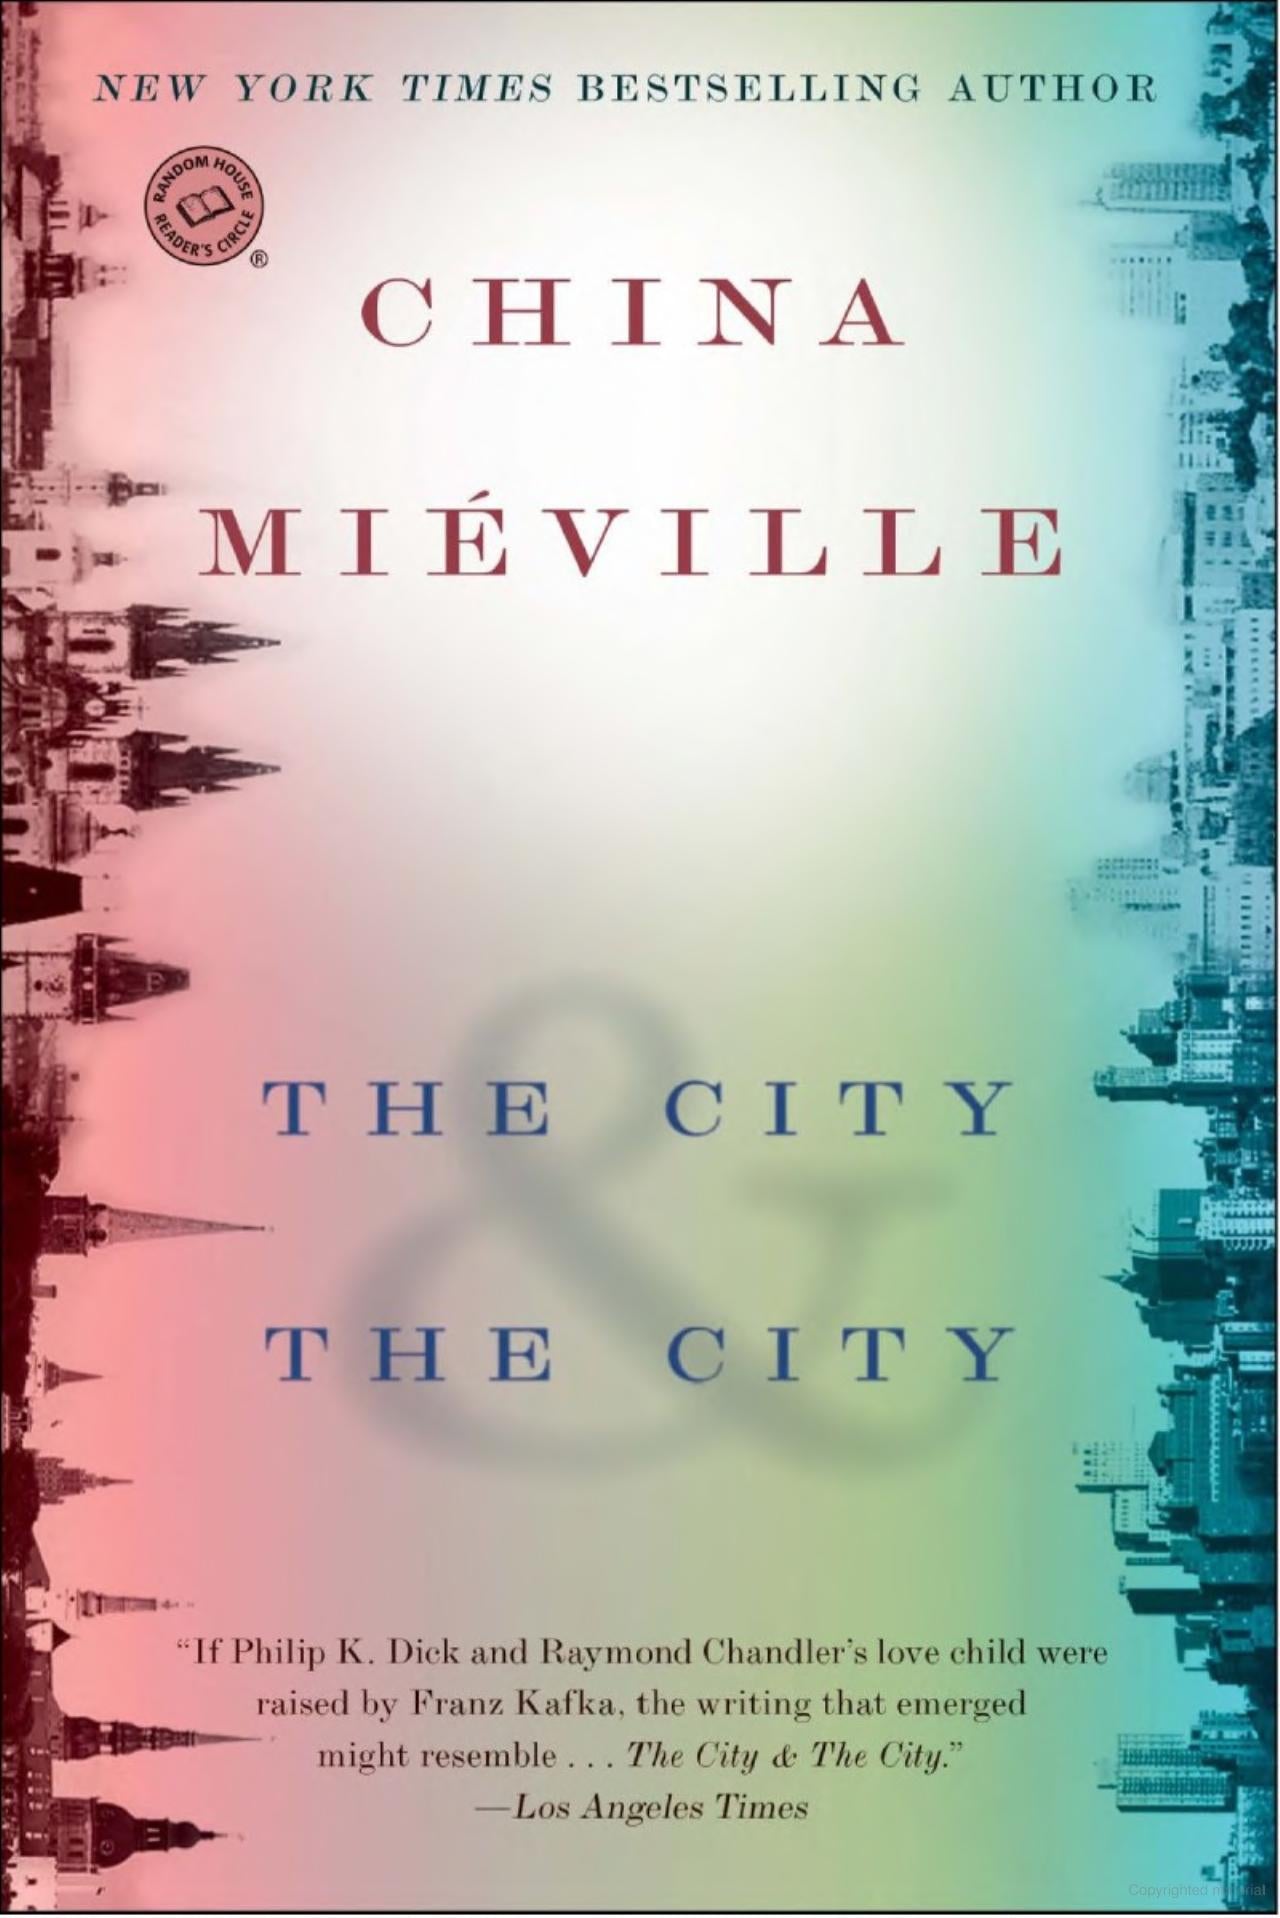 The City & The City -China Miéville - The Society for Unusual Books